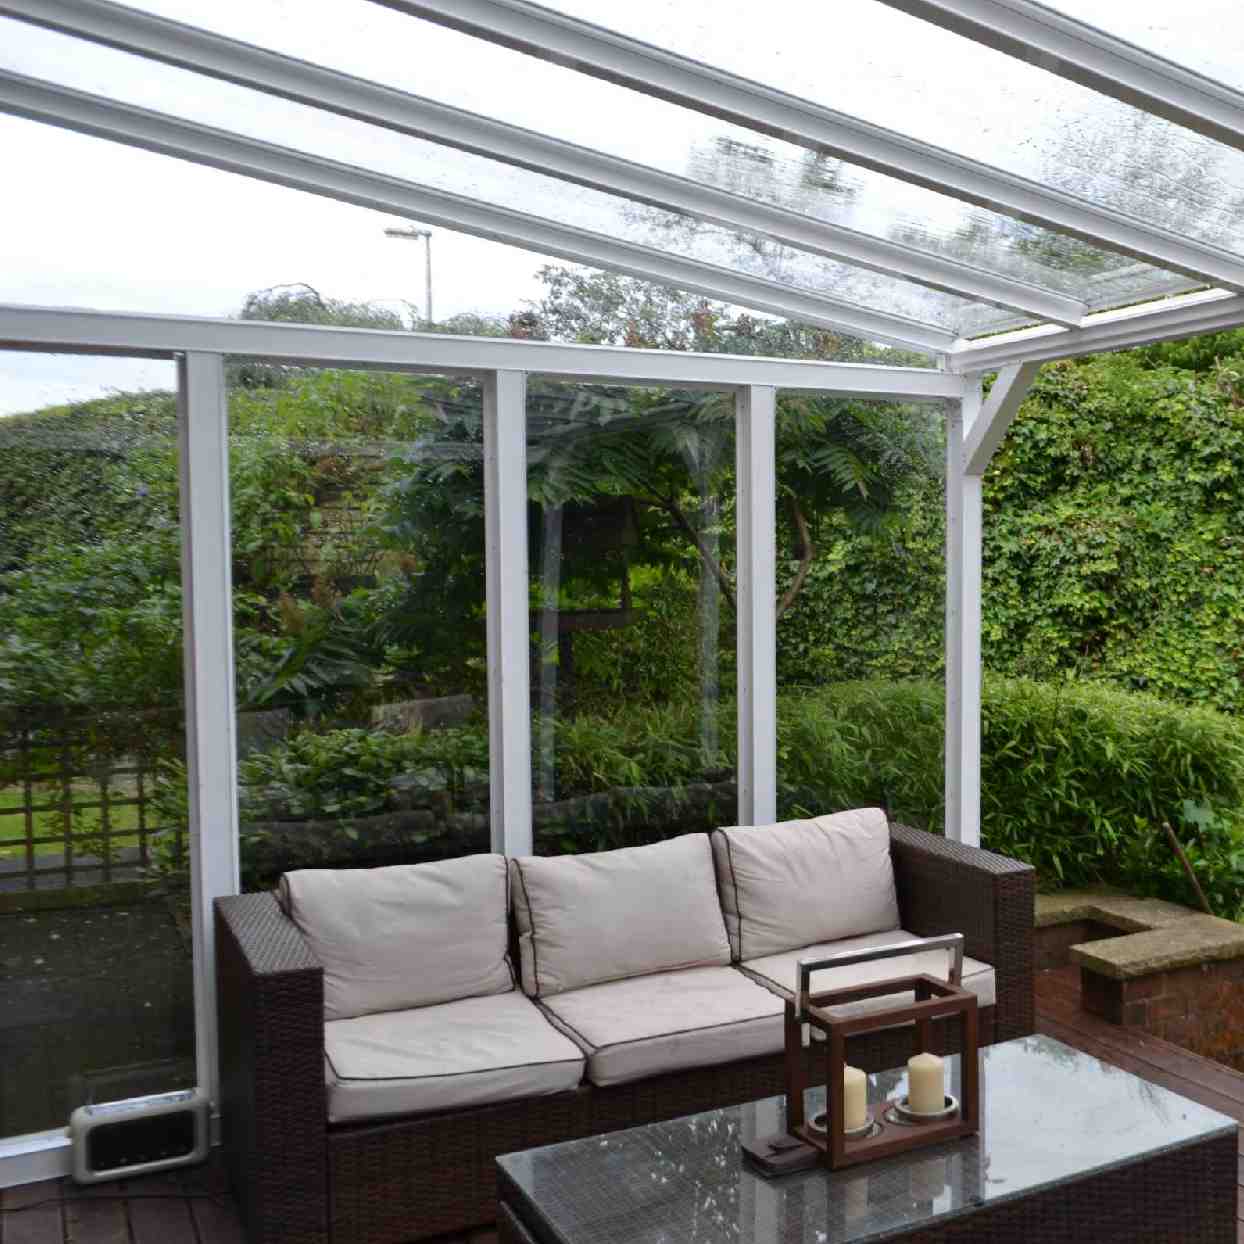 Buy Omega Verandah White with 6mm Glass Clear Plate Polycarbonate Glazing - 8.4m (W) x 2.0m (P), (4) Supporting Posts online today